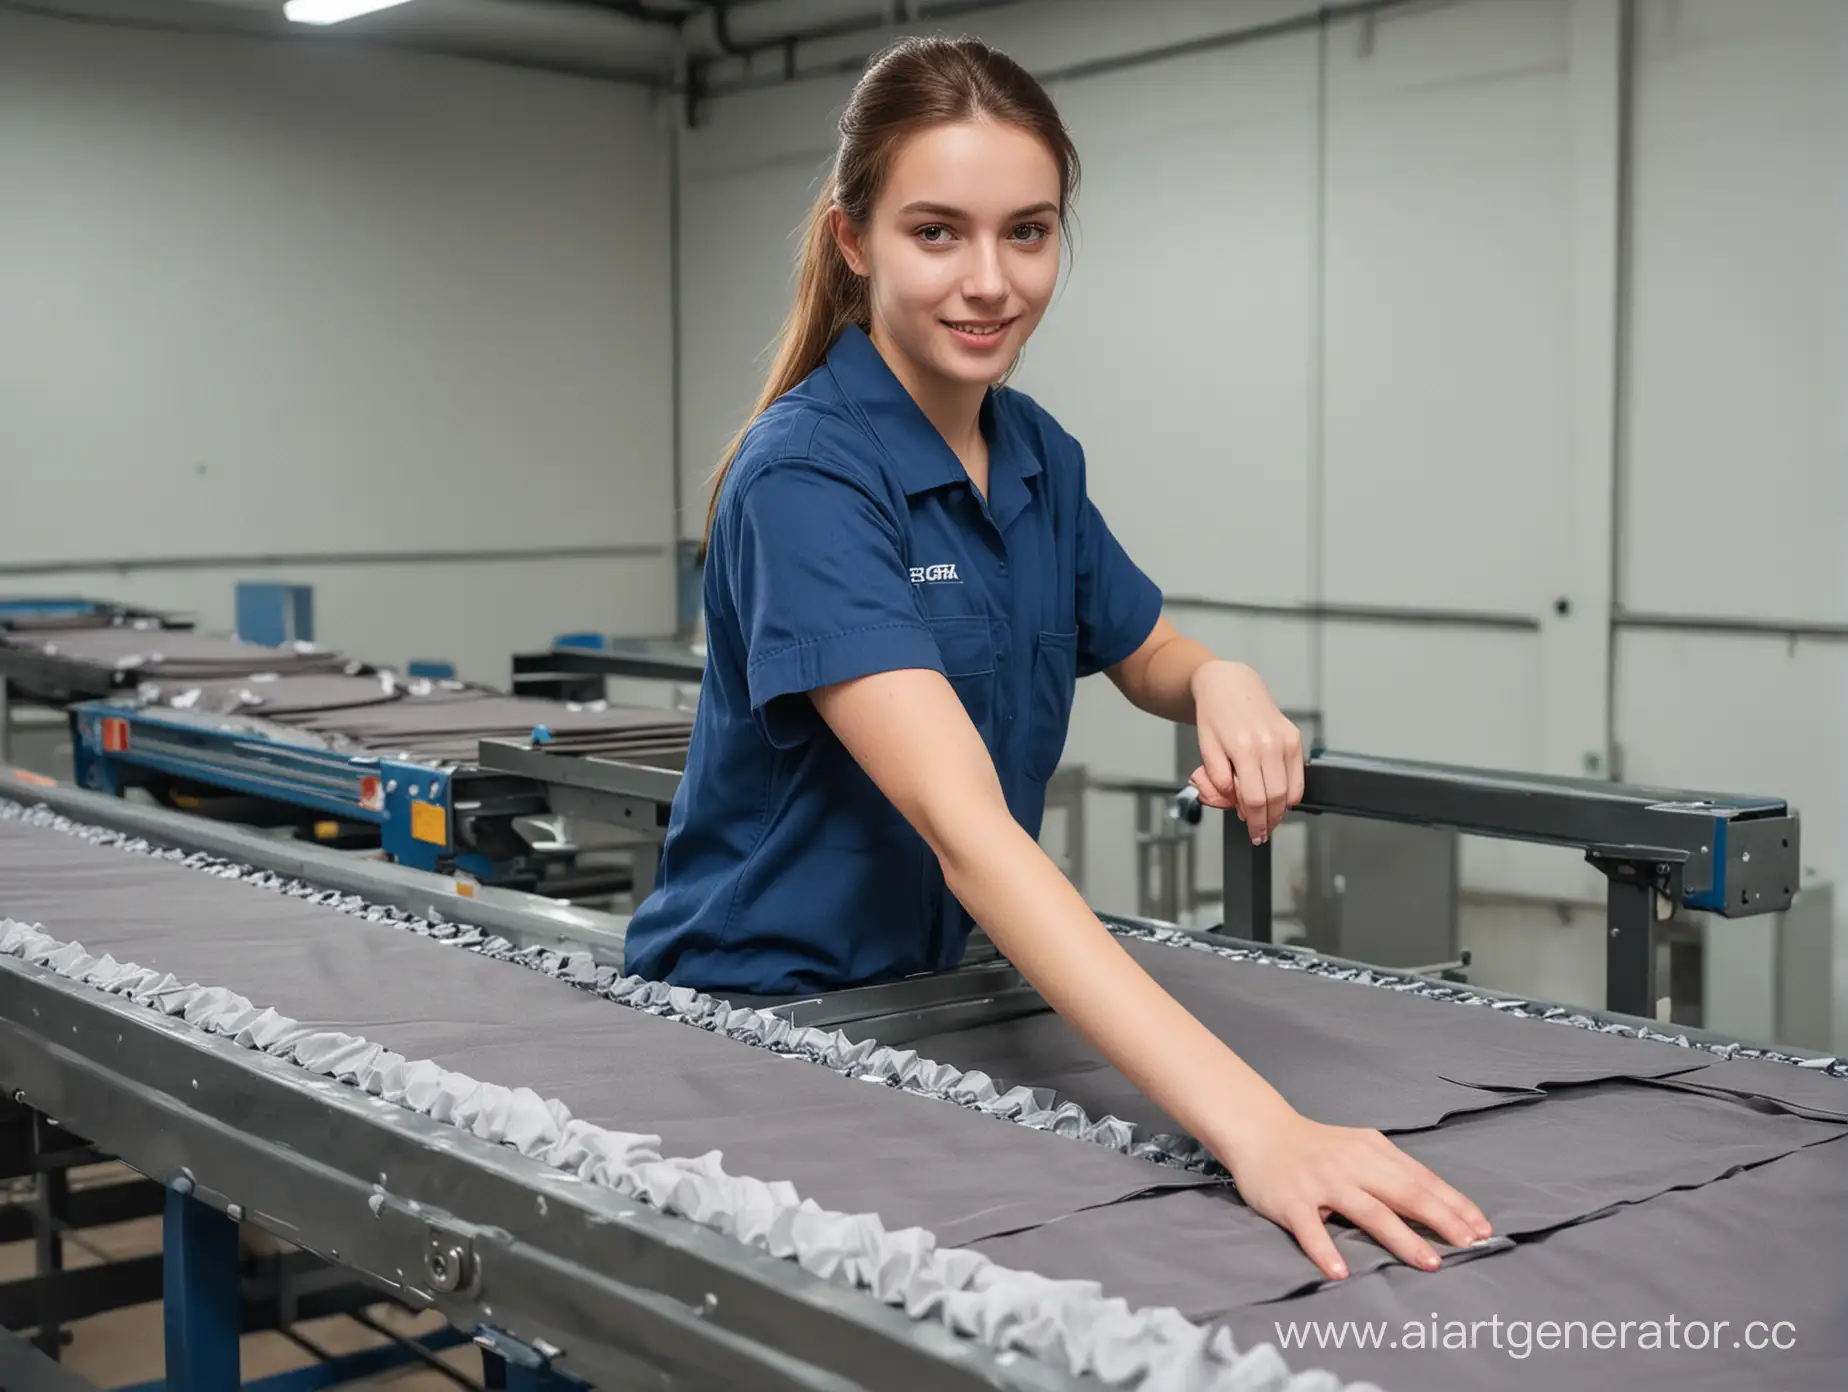 Young-Woman-Sorting-and-Stacking-Products-on-Factory-Conveyor